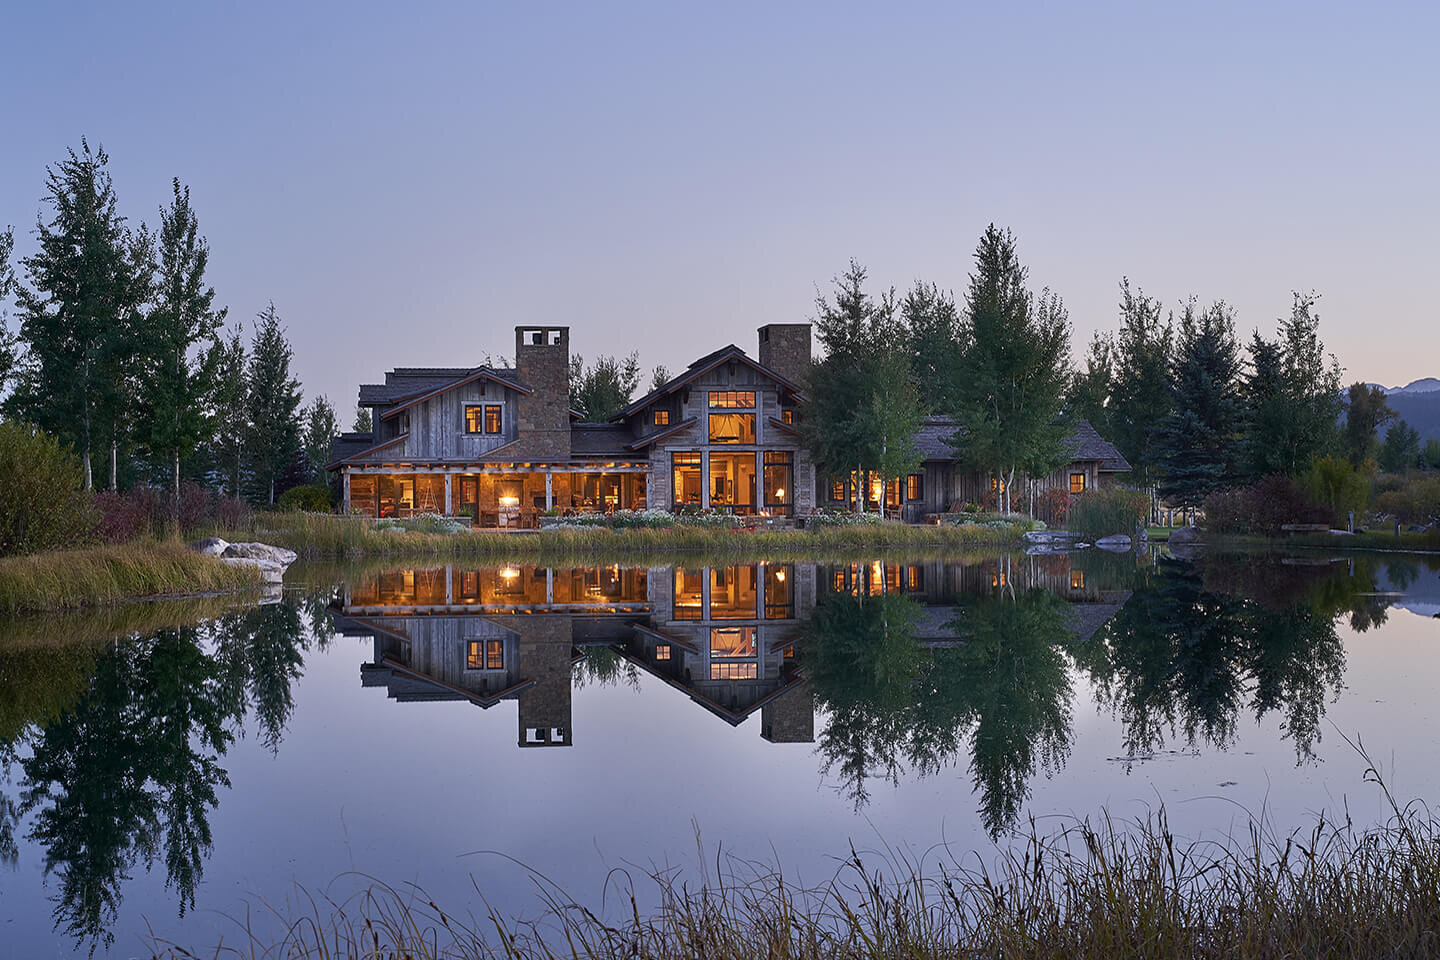 Reflection of residence in pond water at twilight